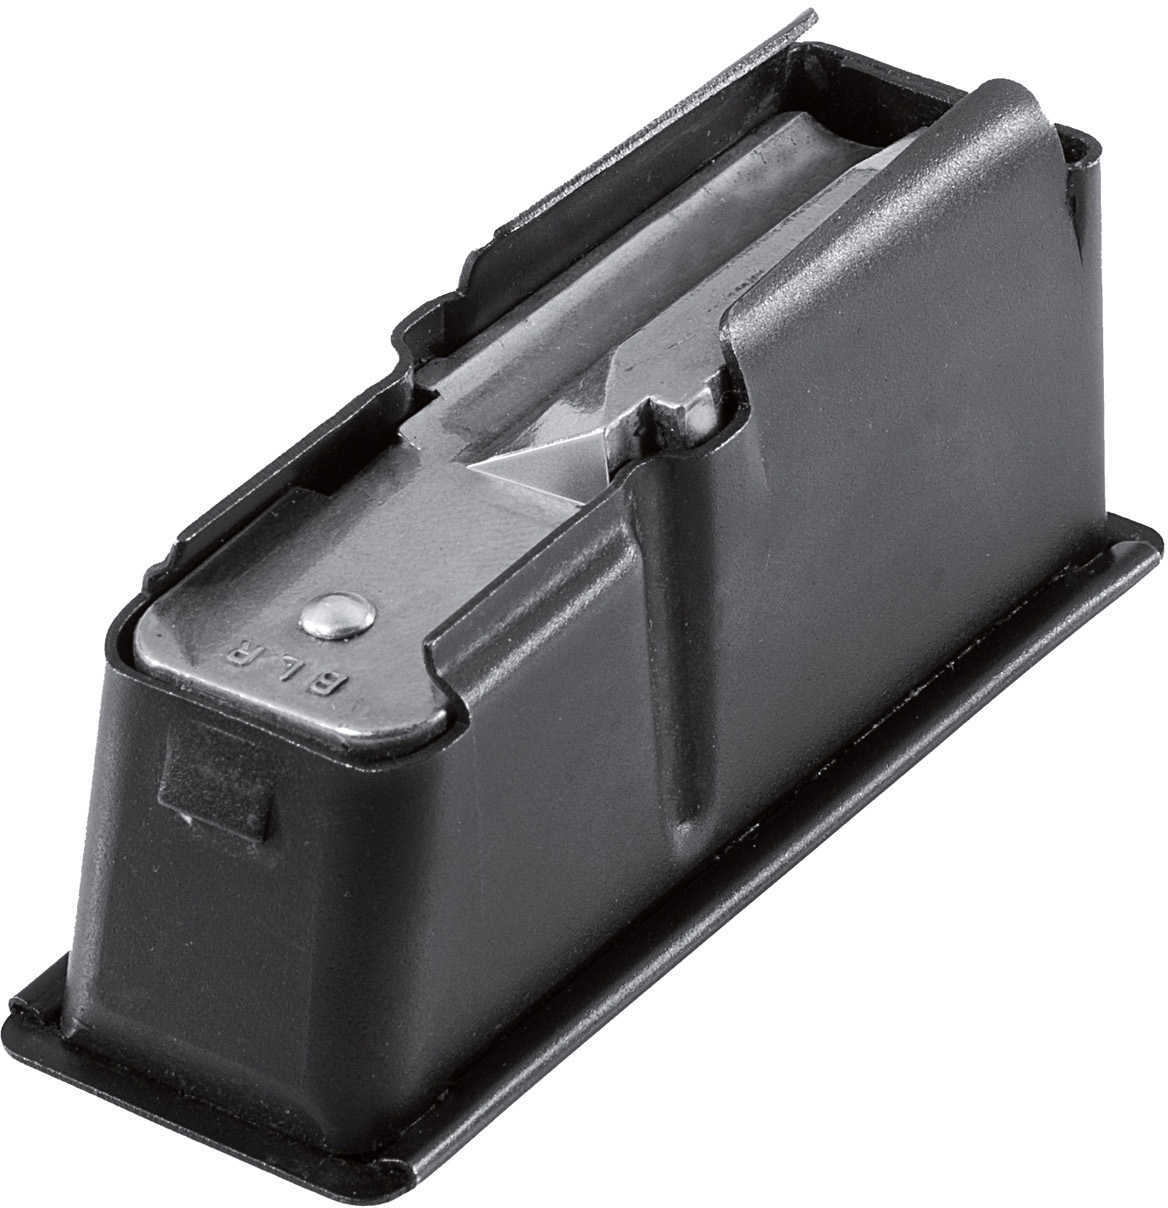 Browning 4 Round 308 Winchester BLR 81 Magazine With Black Finish Md: 112026012